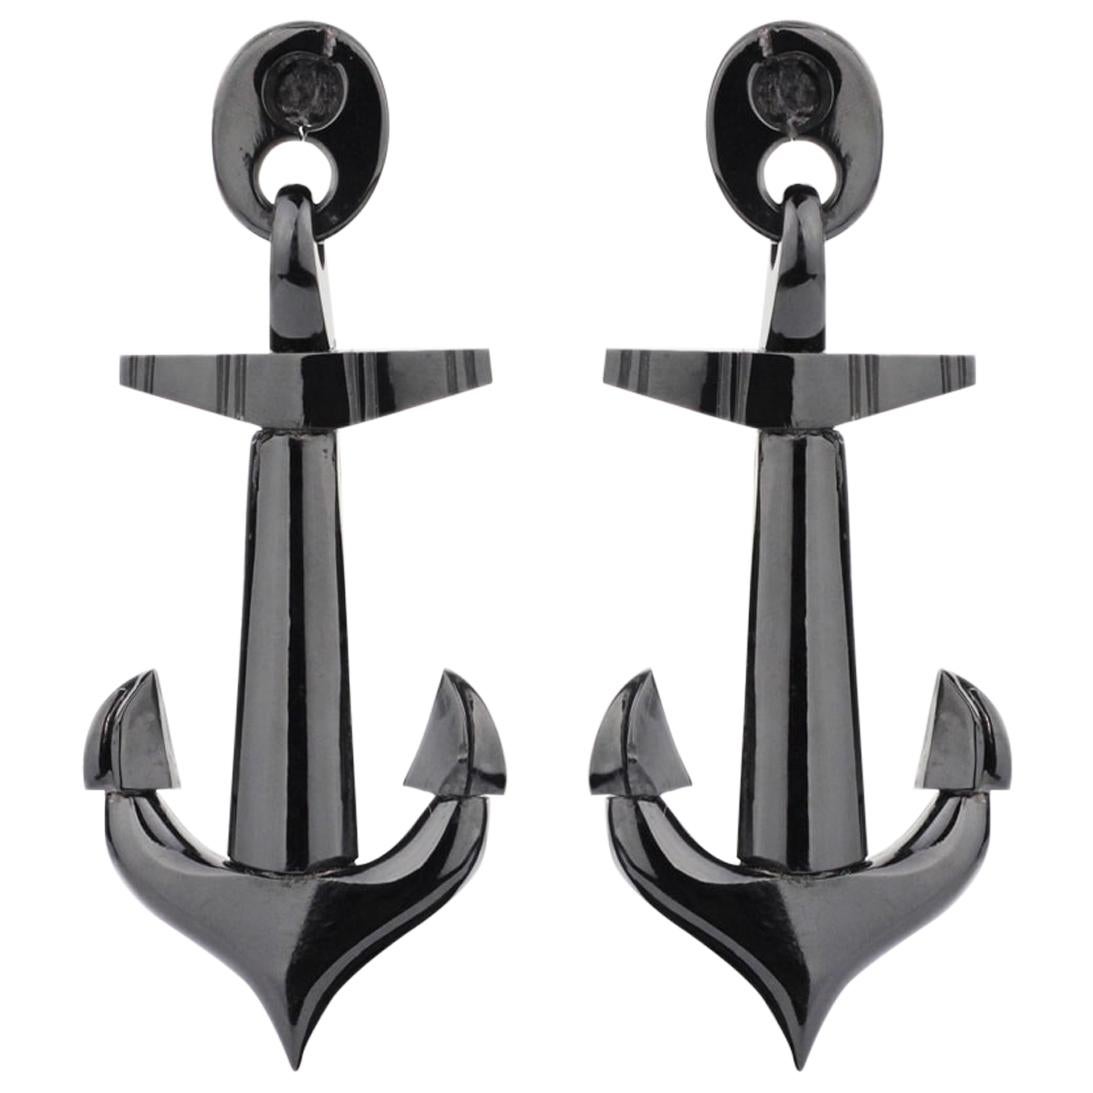 Victorian Whitby Jet Anchor Earrings